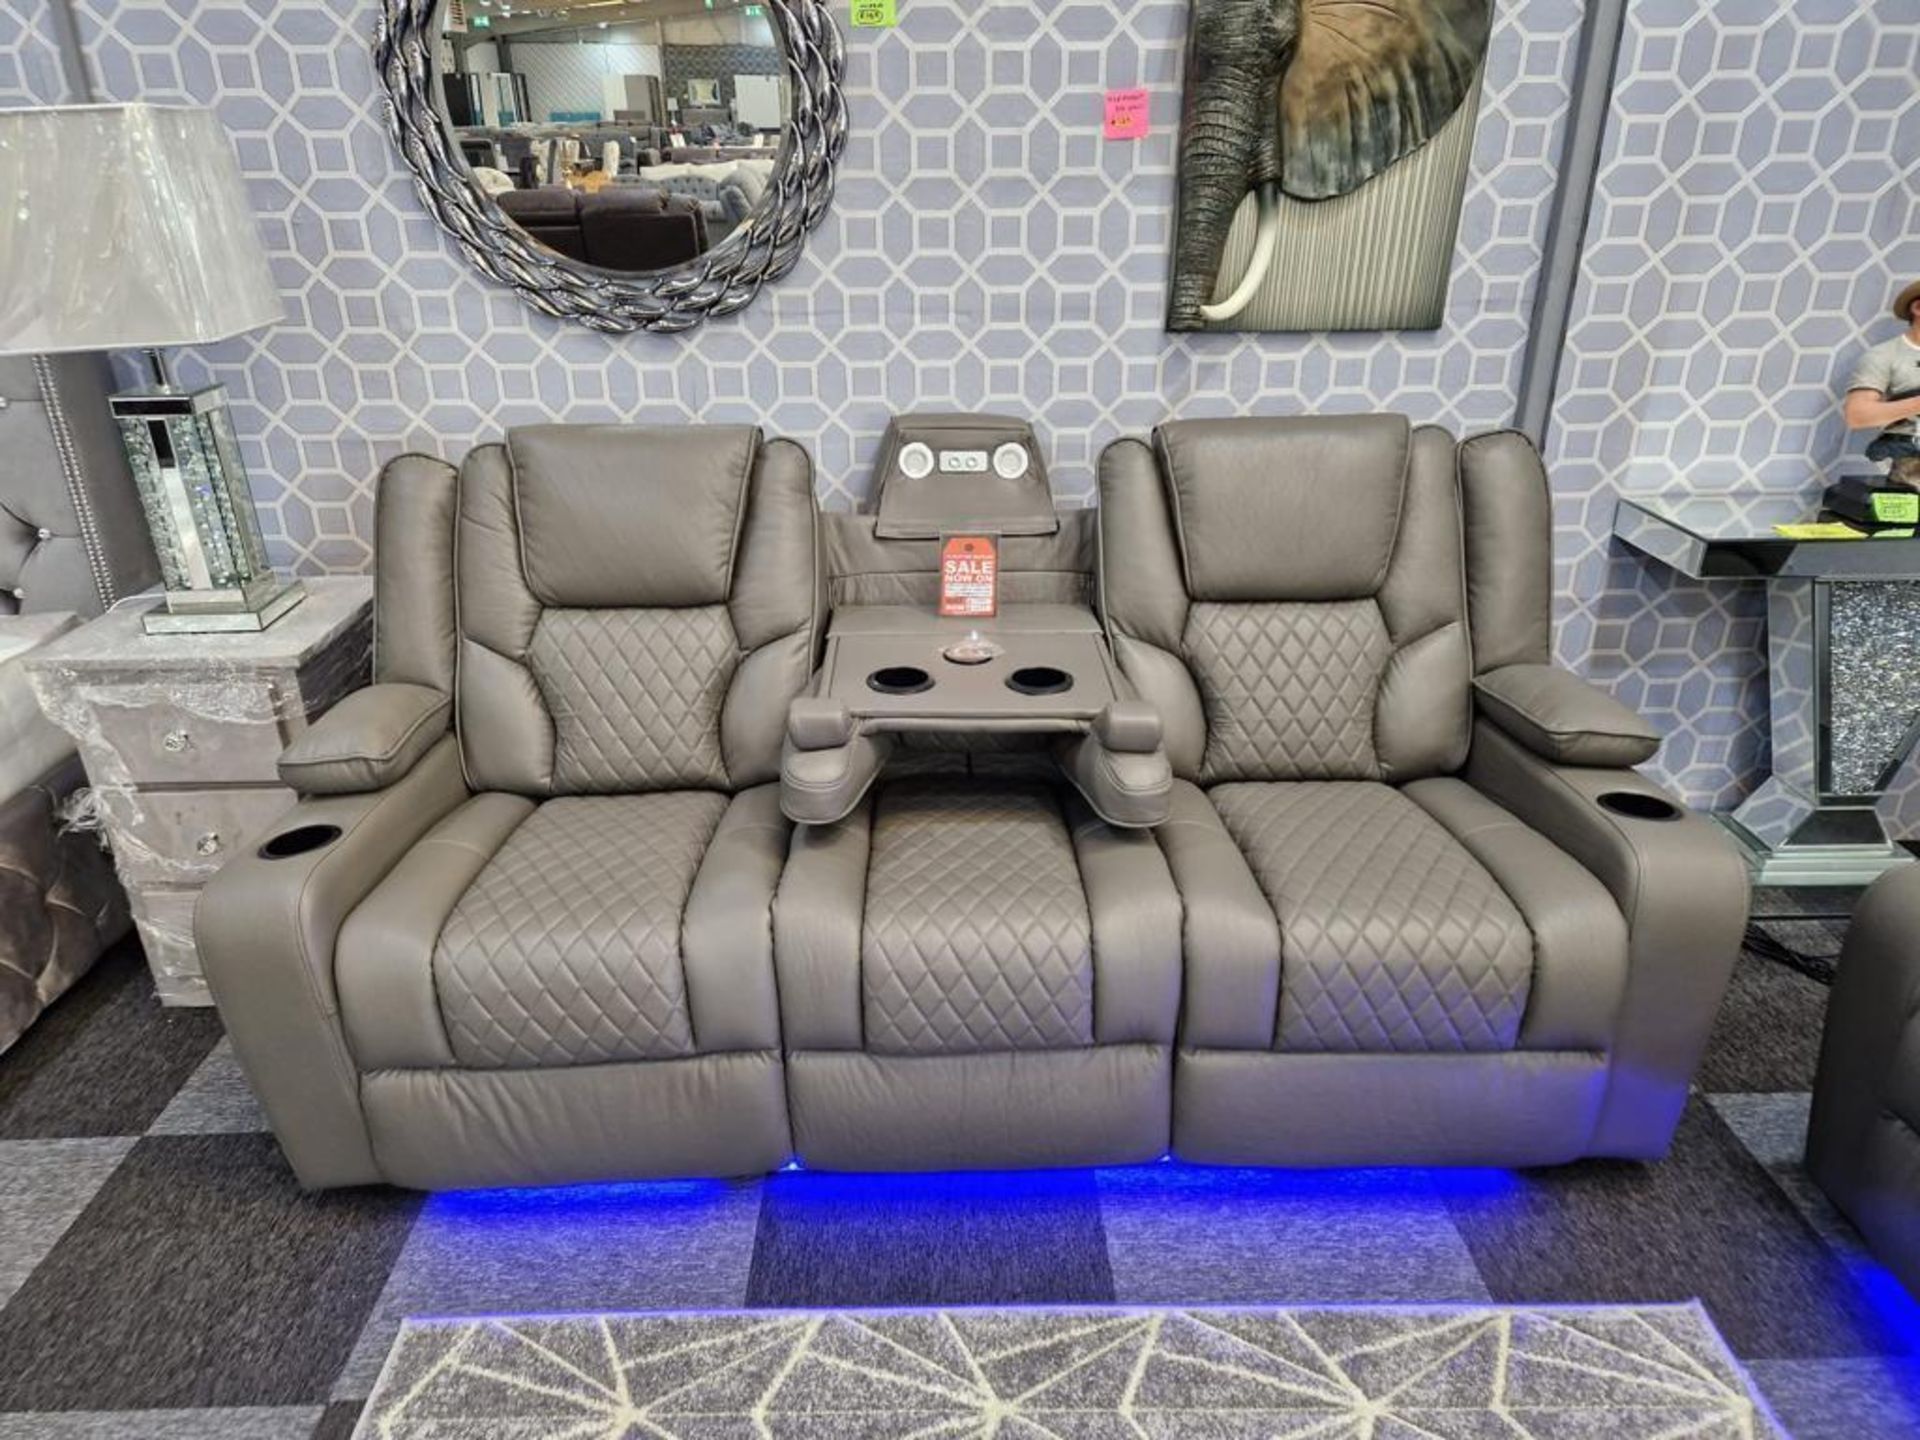 2 X NEW Bentley Grey Leather 3 Seater Electric Recliner With Wireless Charging and Floor lights! - Image 2 of 7